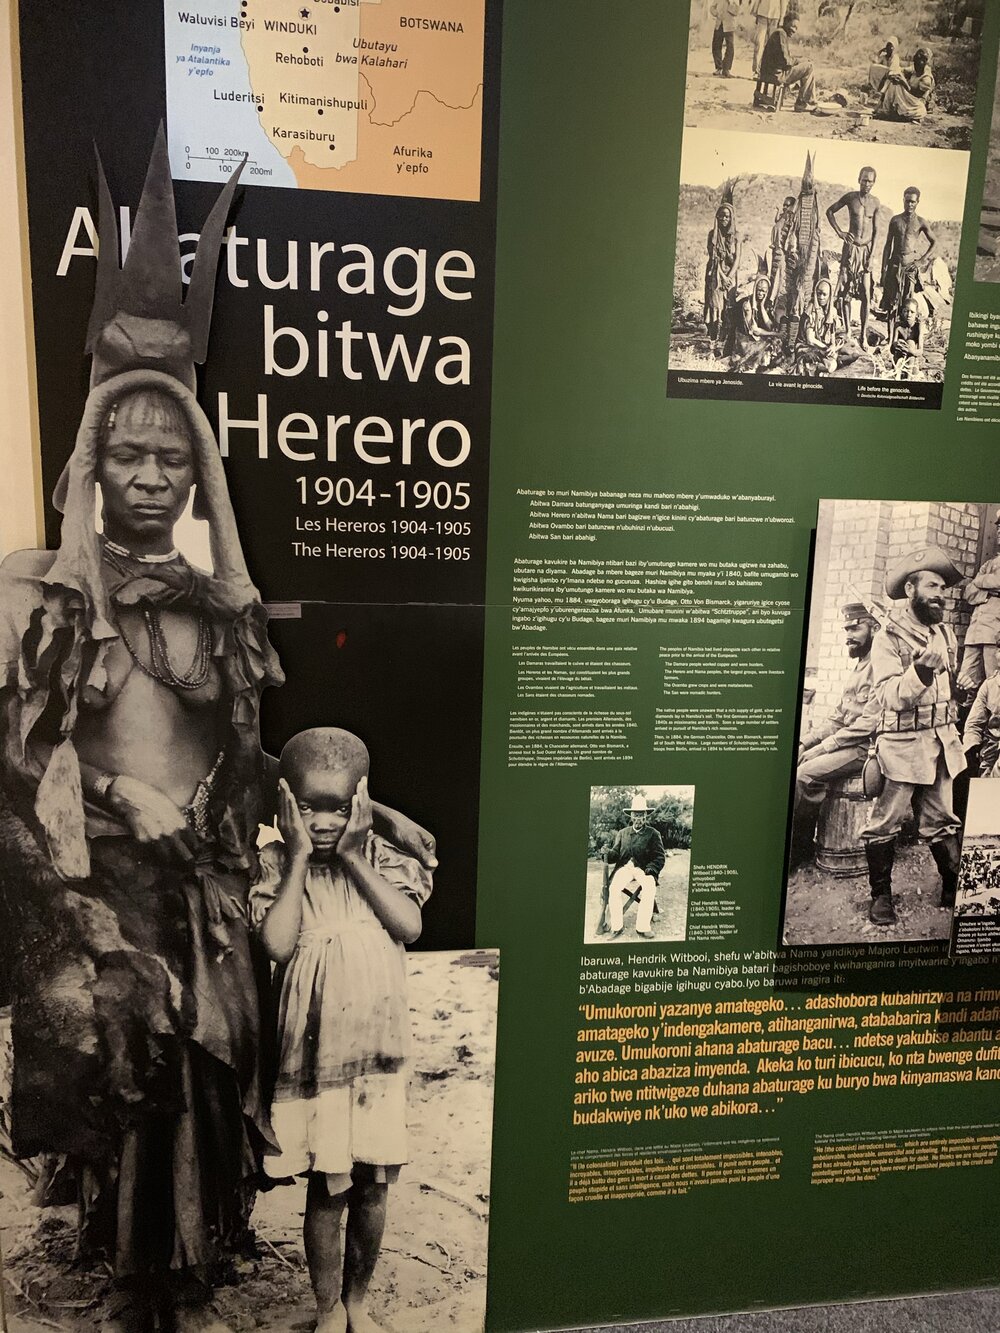 A more extensive genocidal history contained astonishing stories. Germany's treatment of the populations in modern day Namibia, in particular.